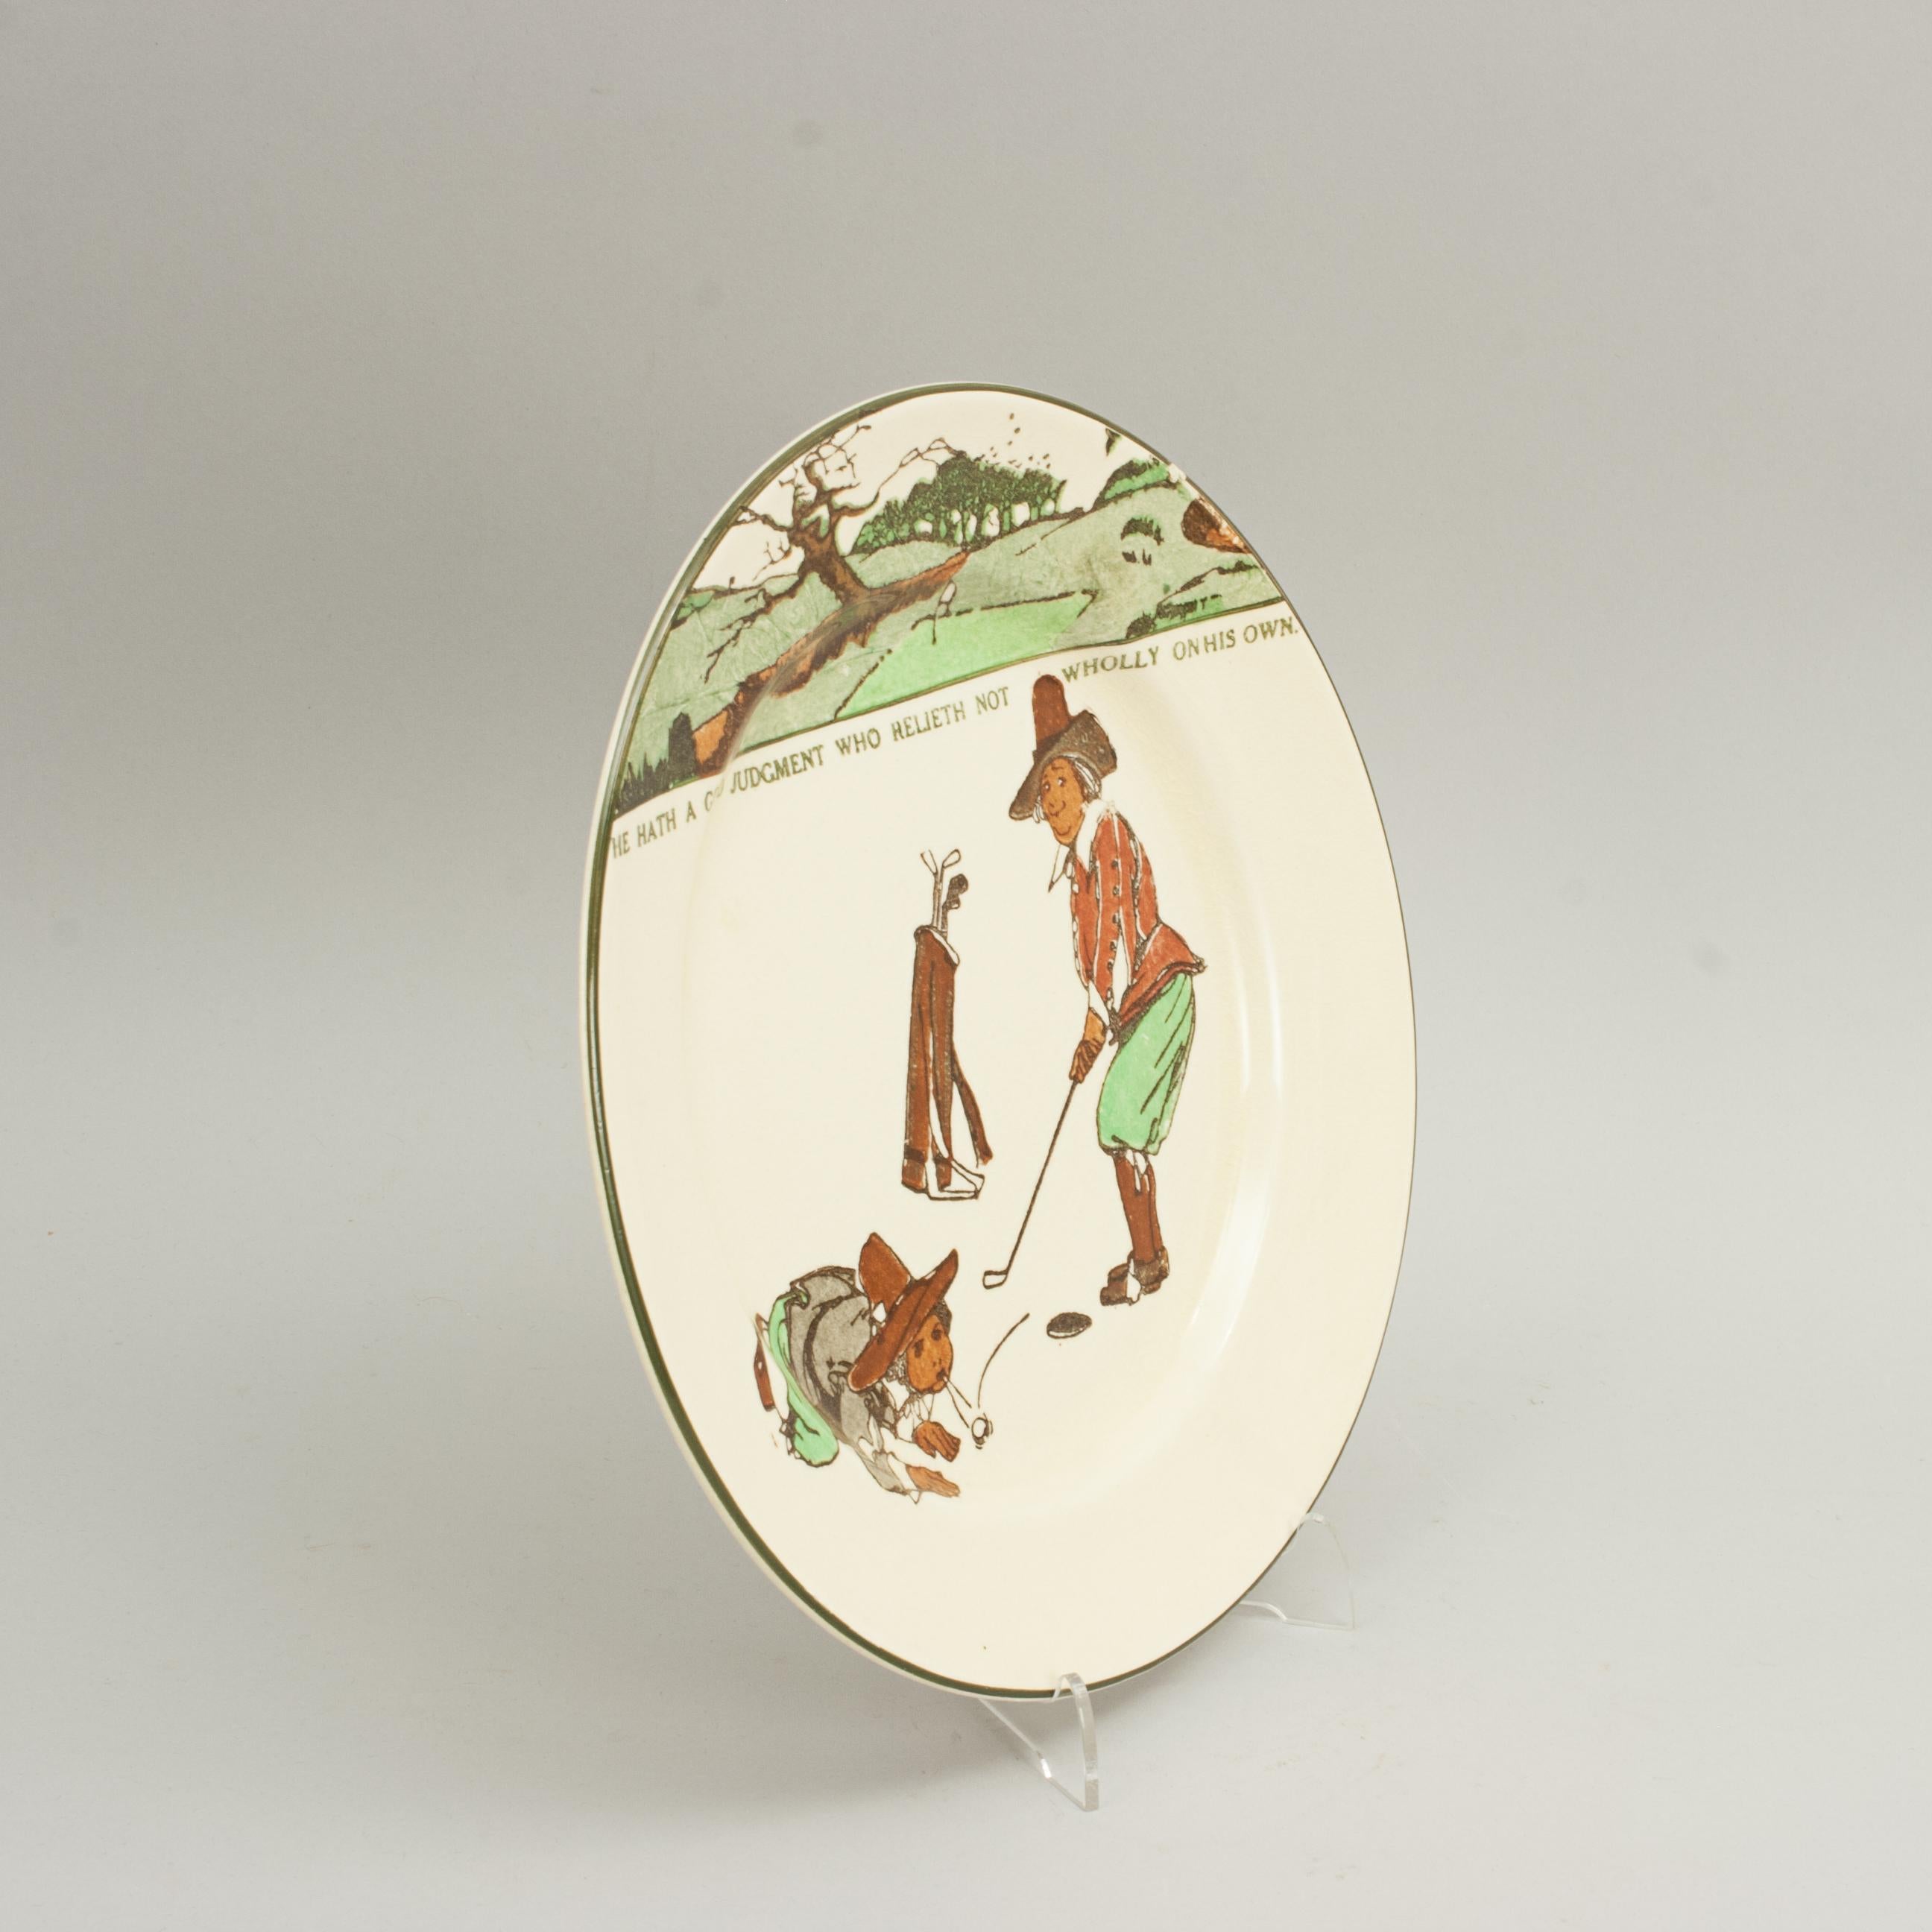 Royal Doulton series ware golf plate.
Royal Doulton rack plate with polychrome golf scene and the proverb, 